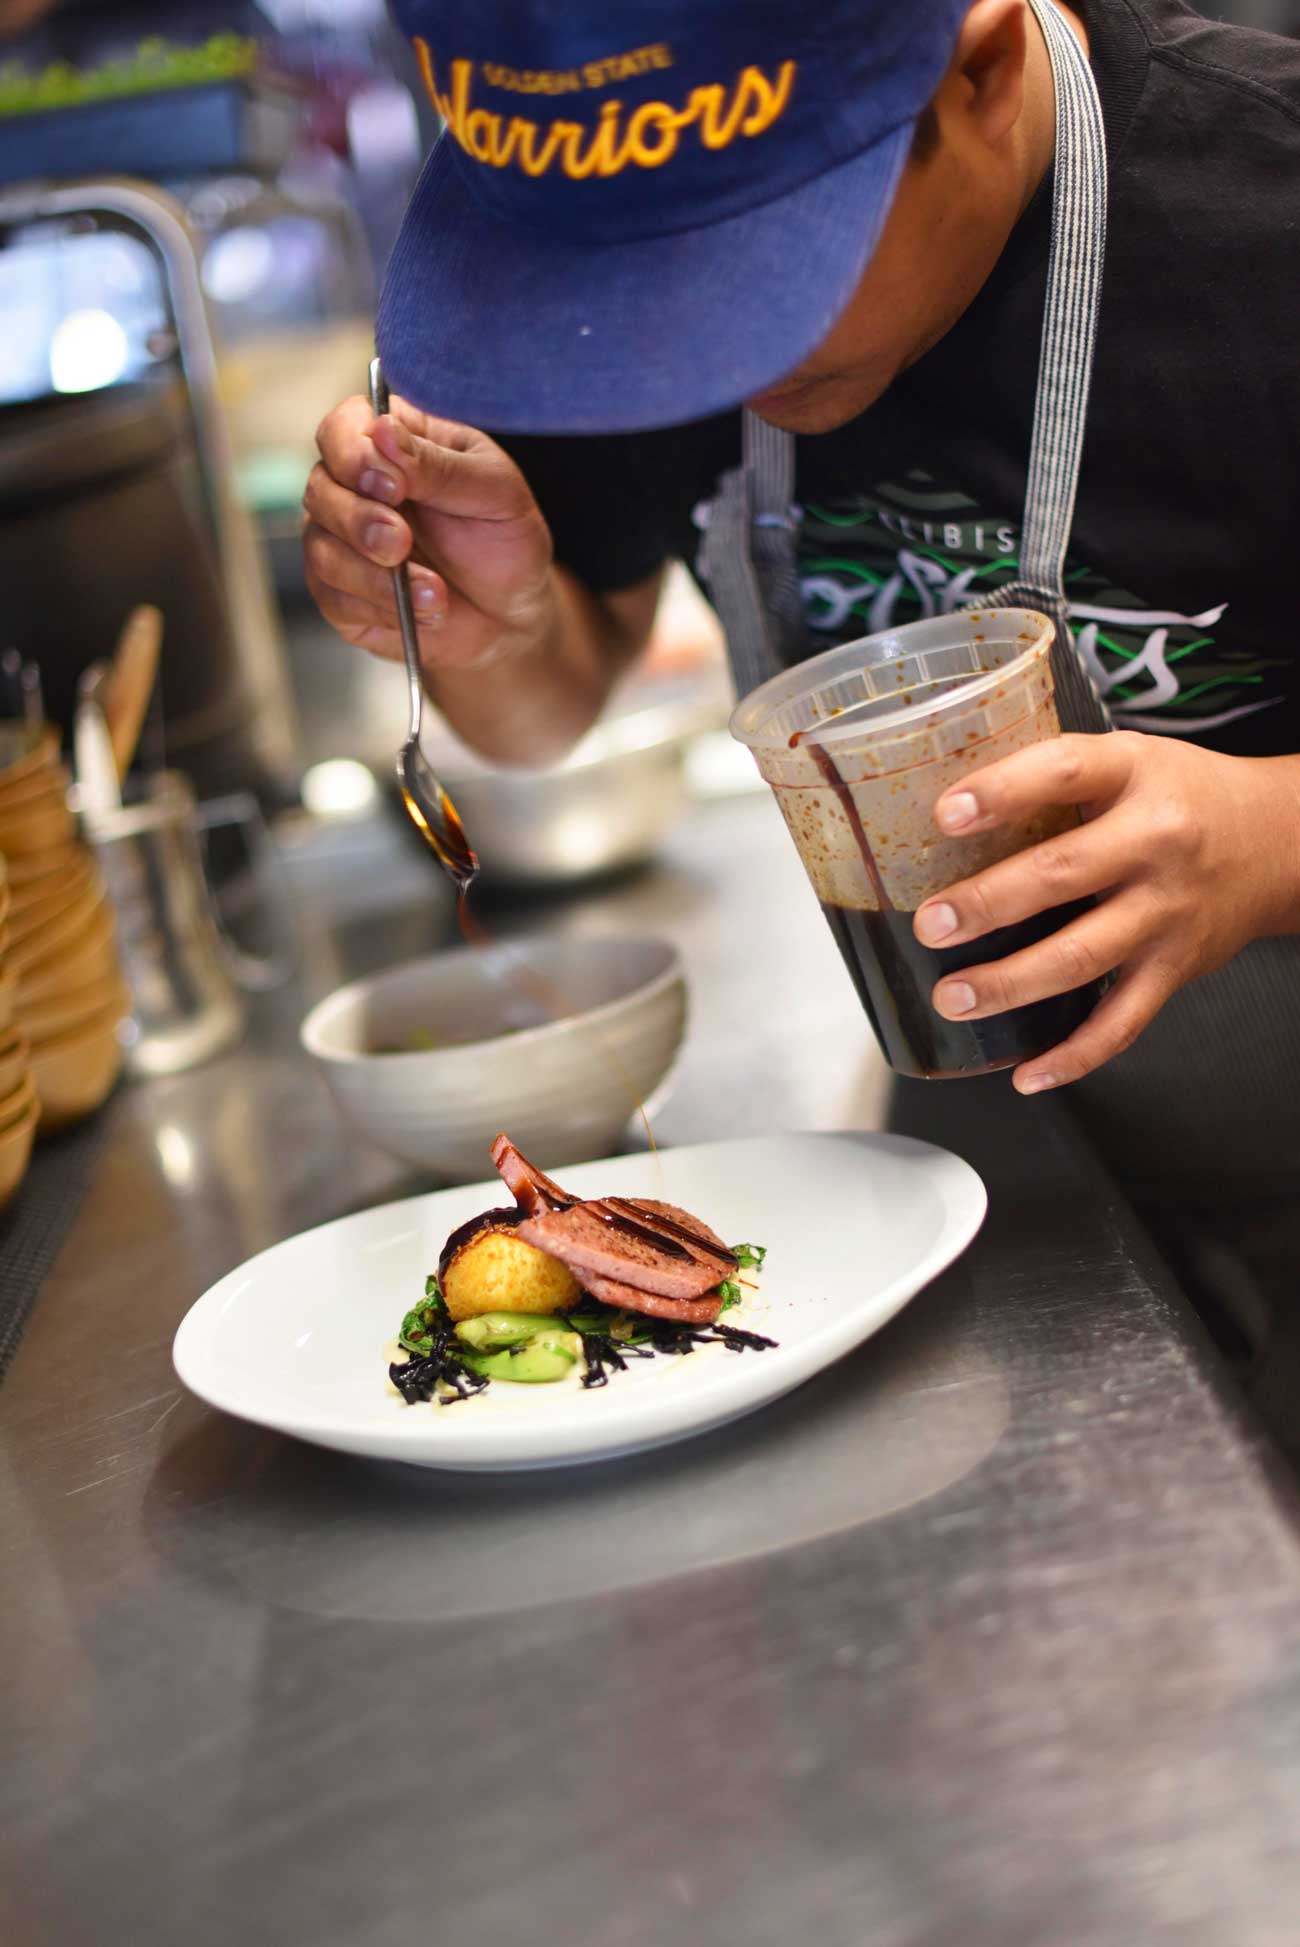 Chef Naputi drizzles a savory sauce over the sous vide spam that's made from scratch at Prbuechu.